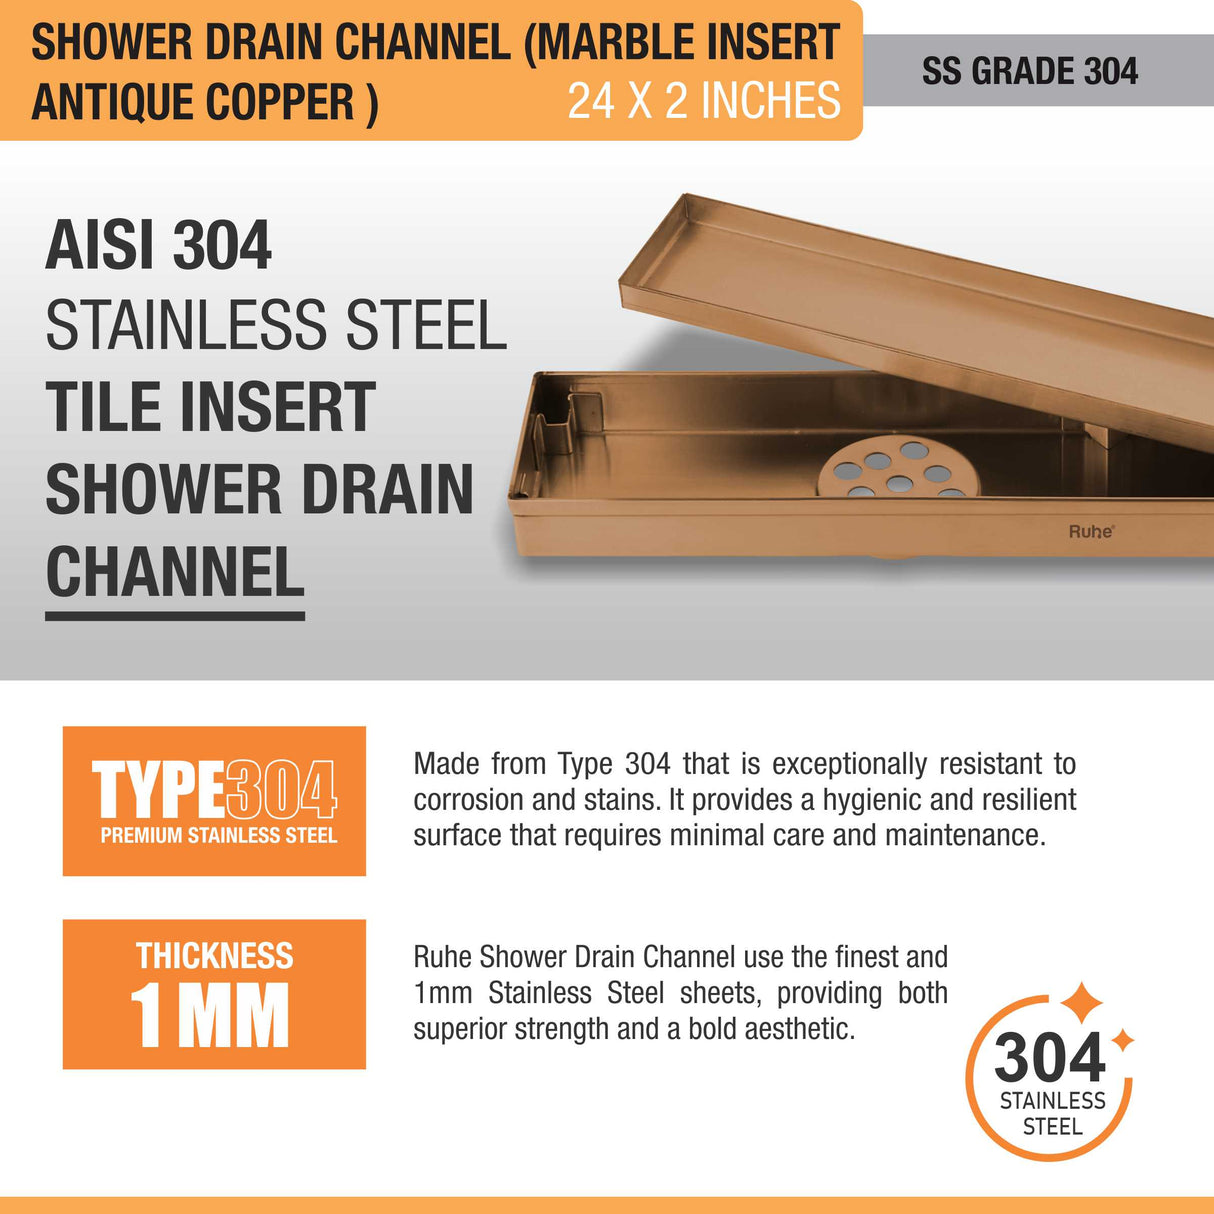 Marble Insert Shower Drain Channel (24 x 2 Inches) ANTIQUE COPPER stainless steel